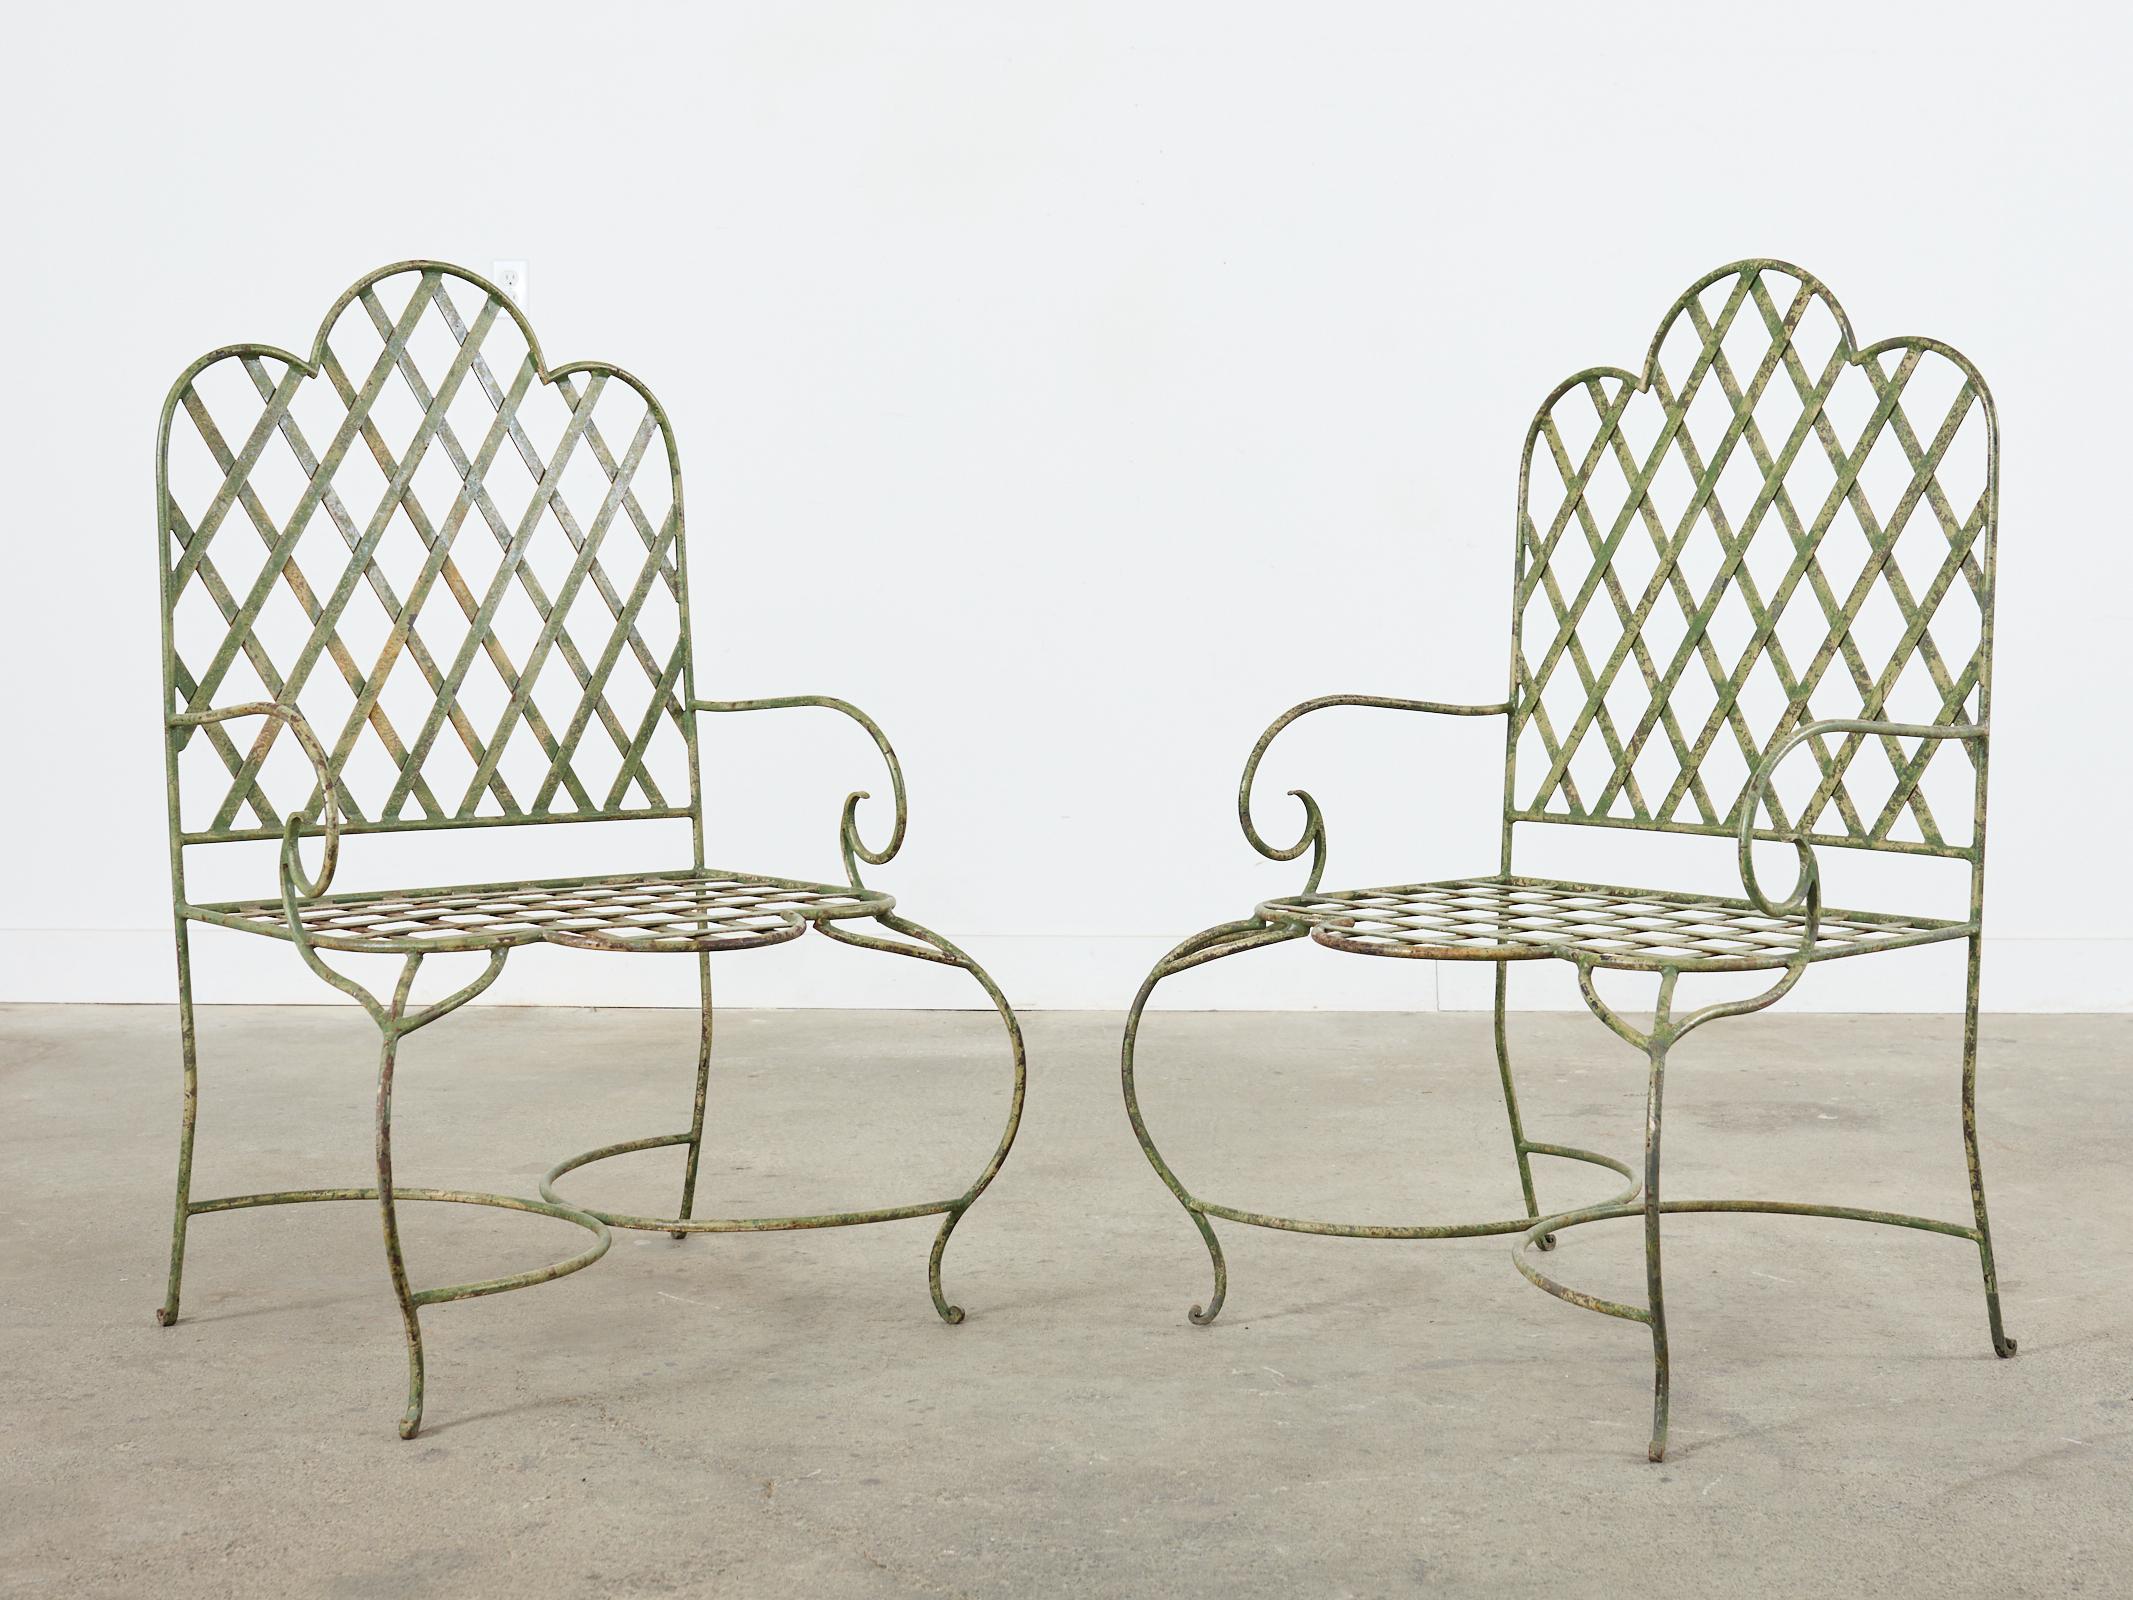 20th Century Set of Five Rose Tarlow Style Iron Lattice Garden Chairs  For Sale